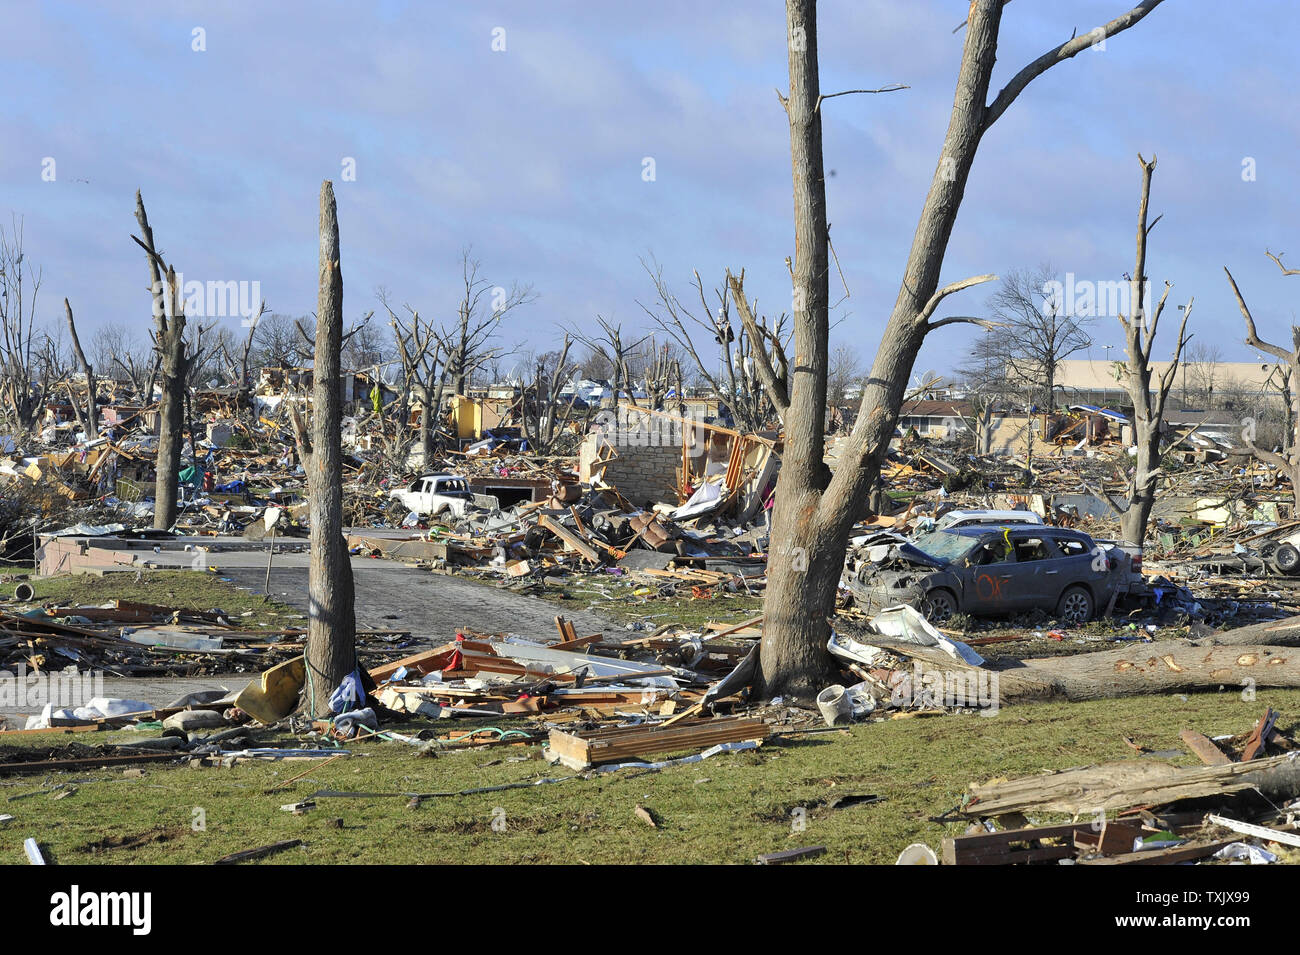 Trees stand amid the devastation of an EF4 tornado in Washington, Illinois on November 18, 2013. Six people died and hundreds of homes were destroyed in Illinois as 81 tornadoes were sighted on November 17 throughout 12 midwest states including the tornado that struck Washington, Illinois.     UPI/Brian Kersey.     UPI/Brian Kersey Stock Photo